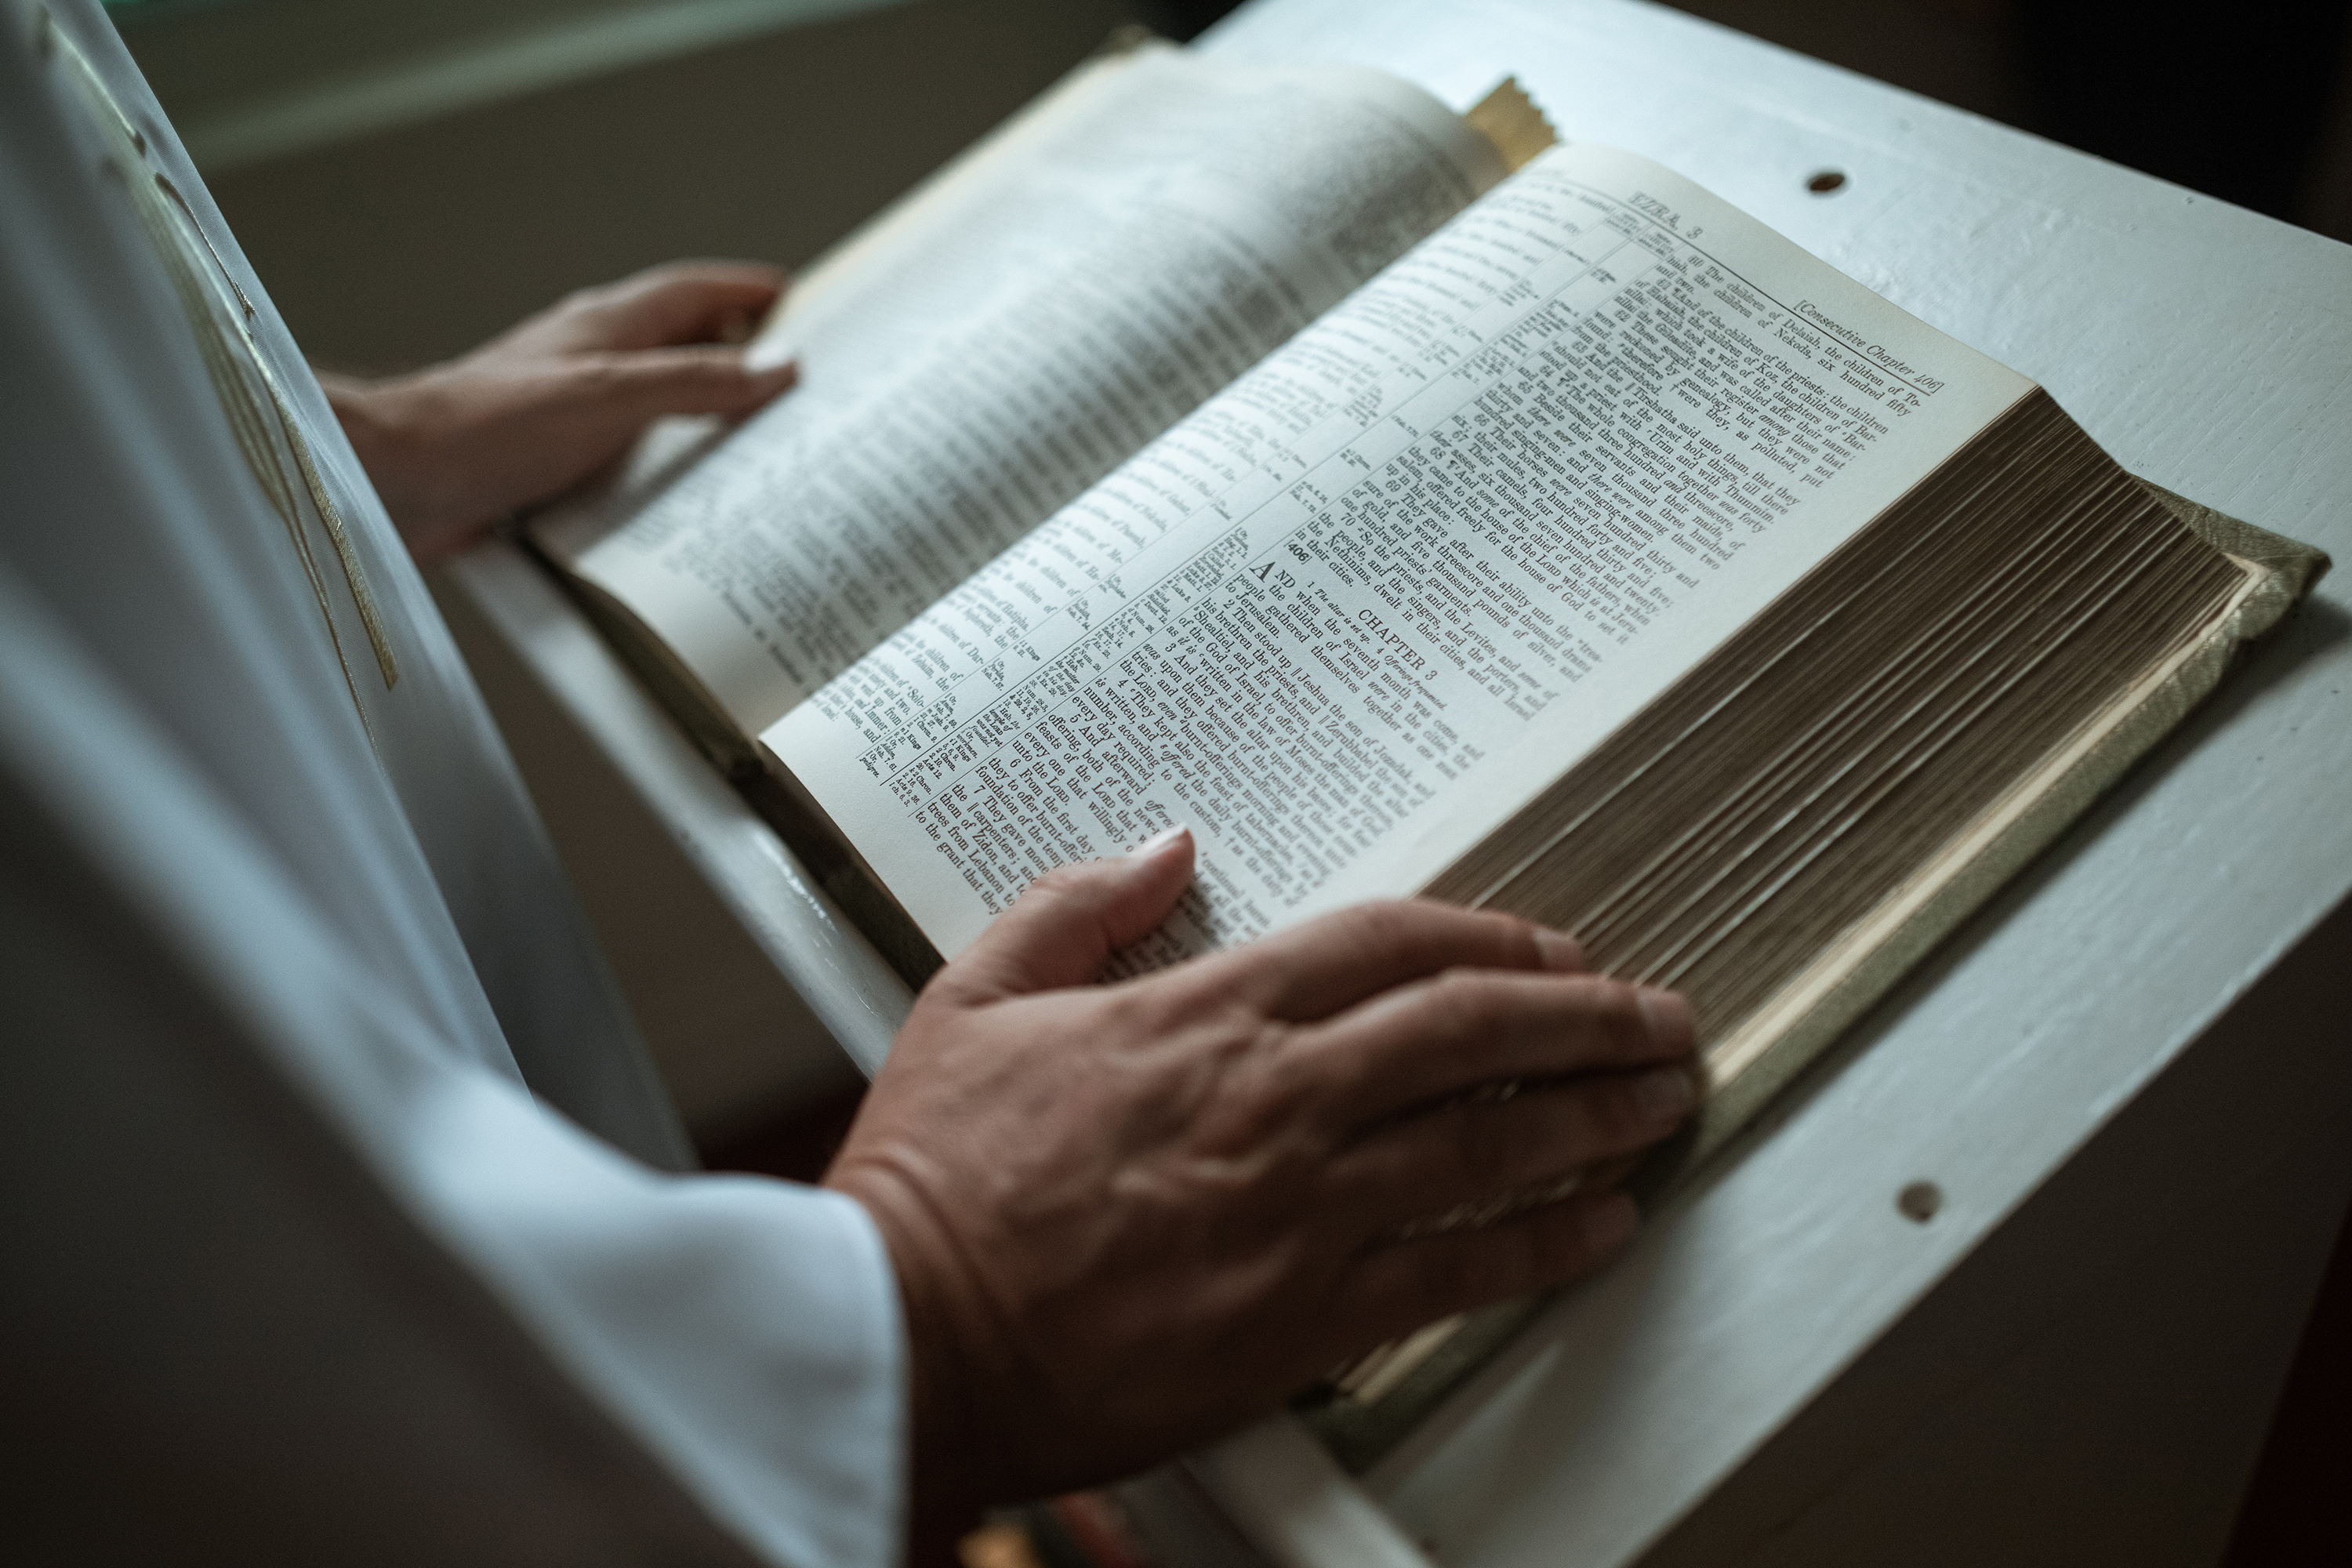 The gospel and the readings are the centerpiece for spreading the word of God.  (Pexels)